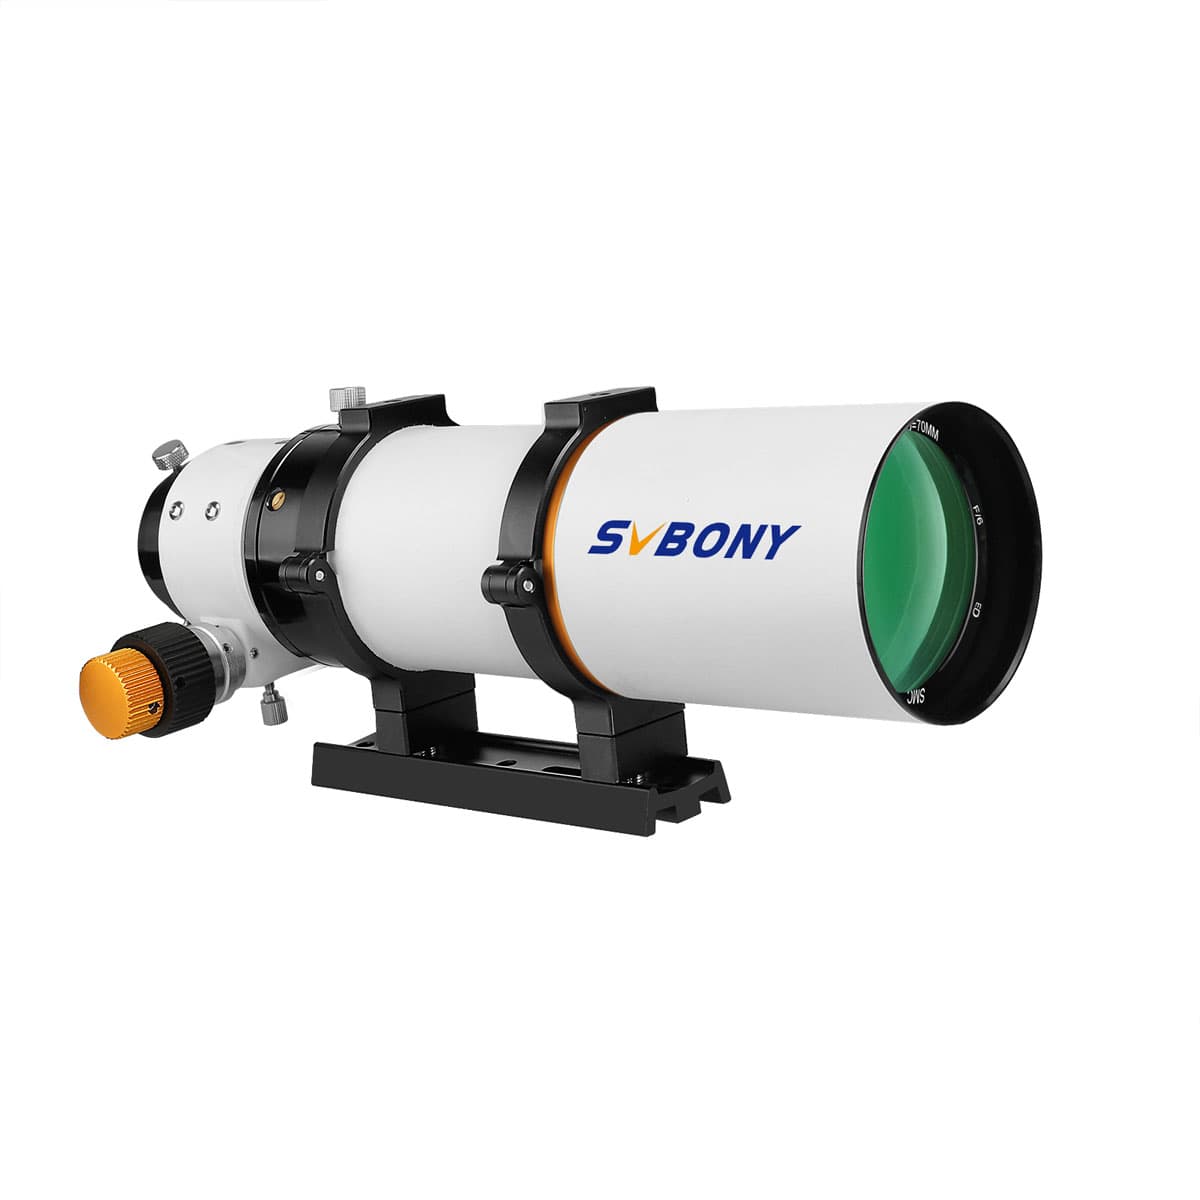 SVBONY SV503 70ED: A High-Quality ED Apochromatic Refractor Telescope for Astrophotography